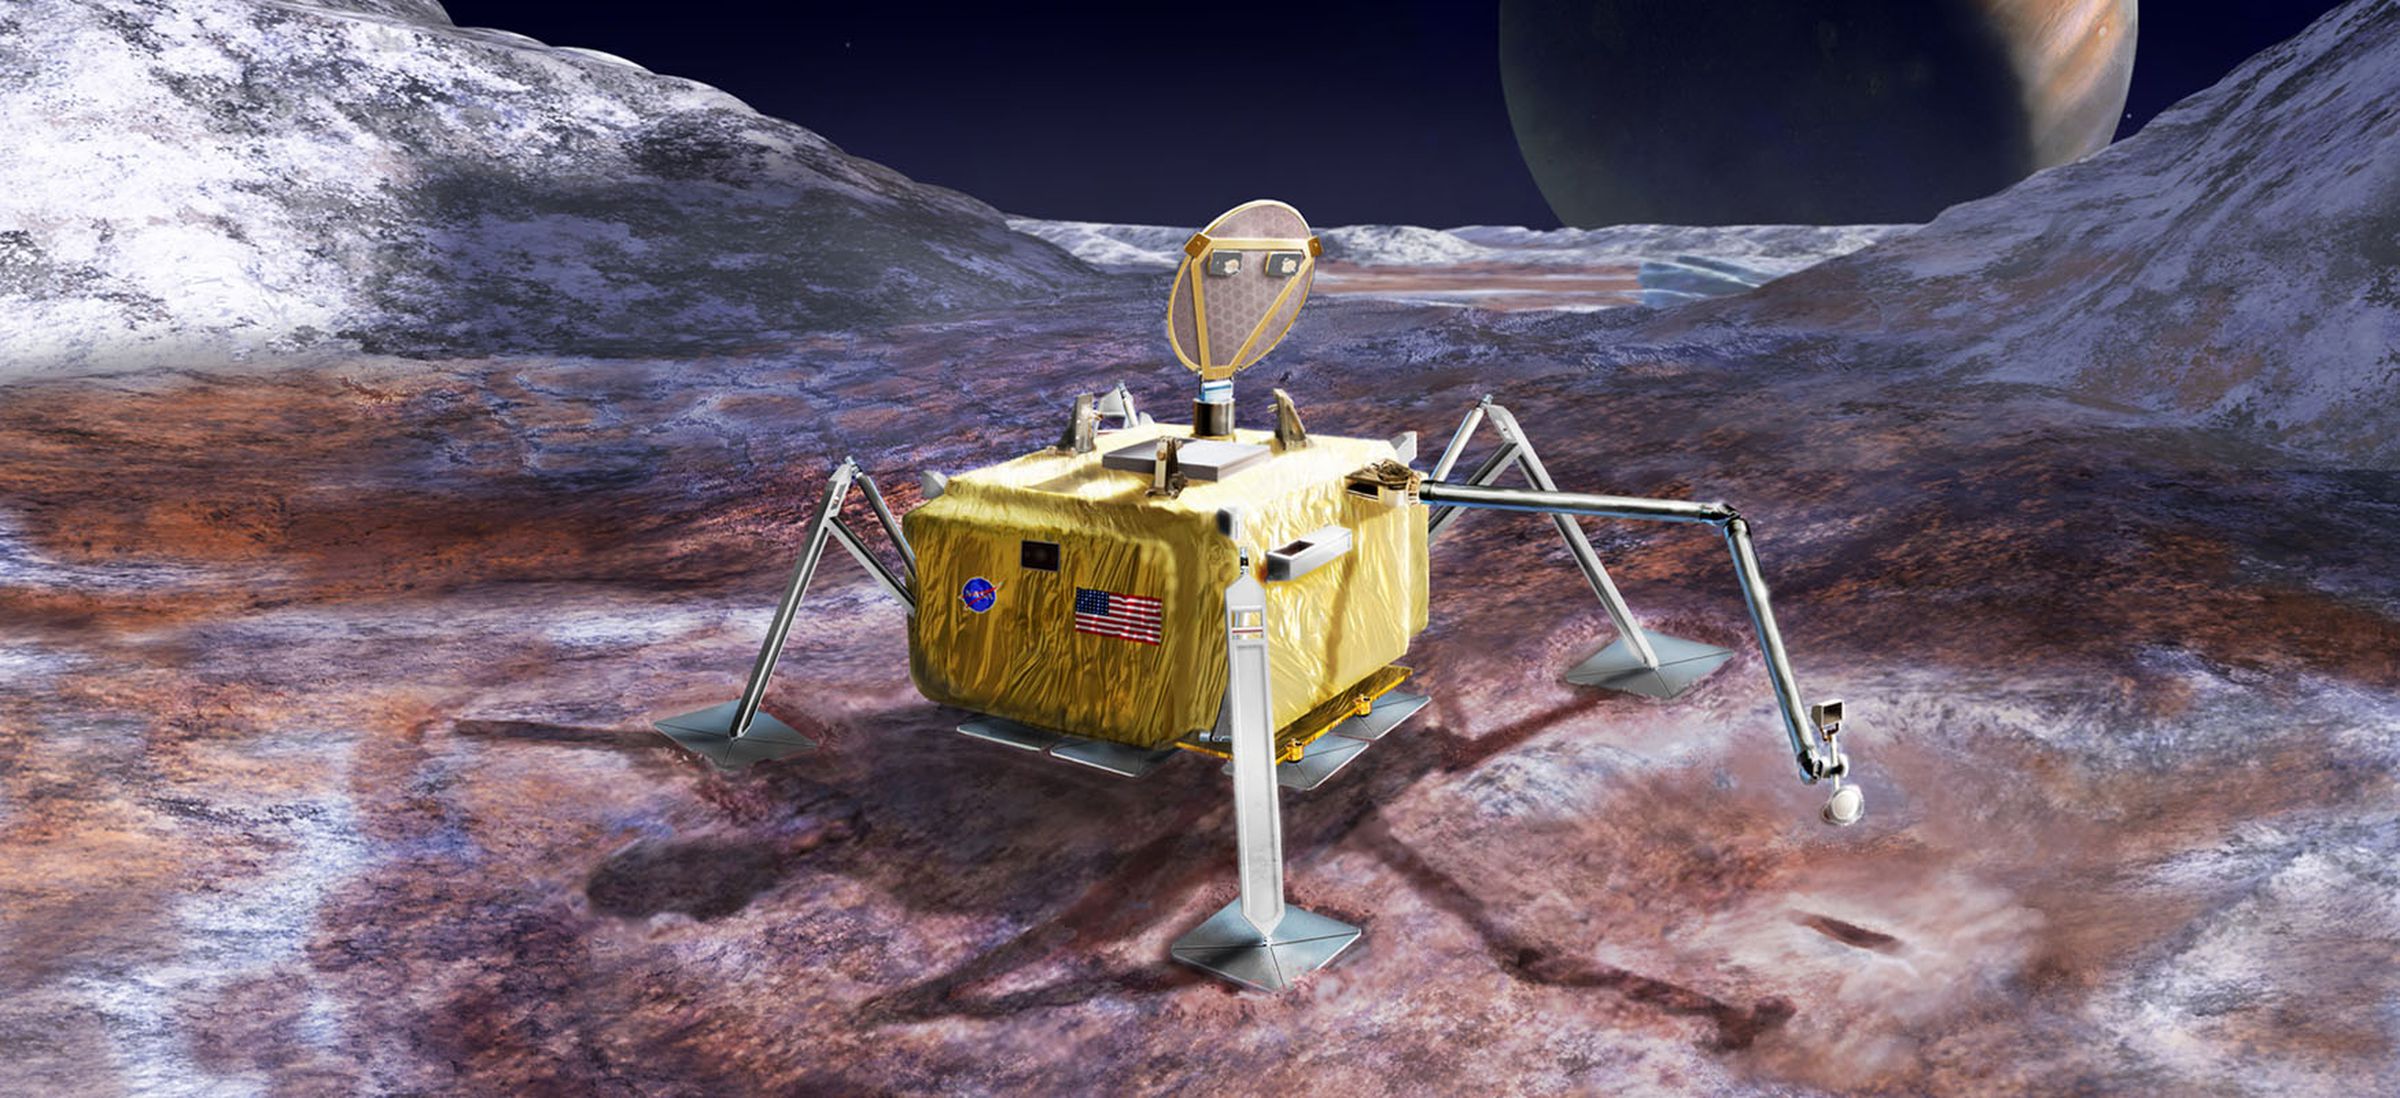 An artist impression of what a Europa lander could look like